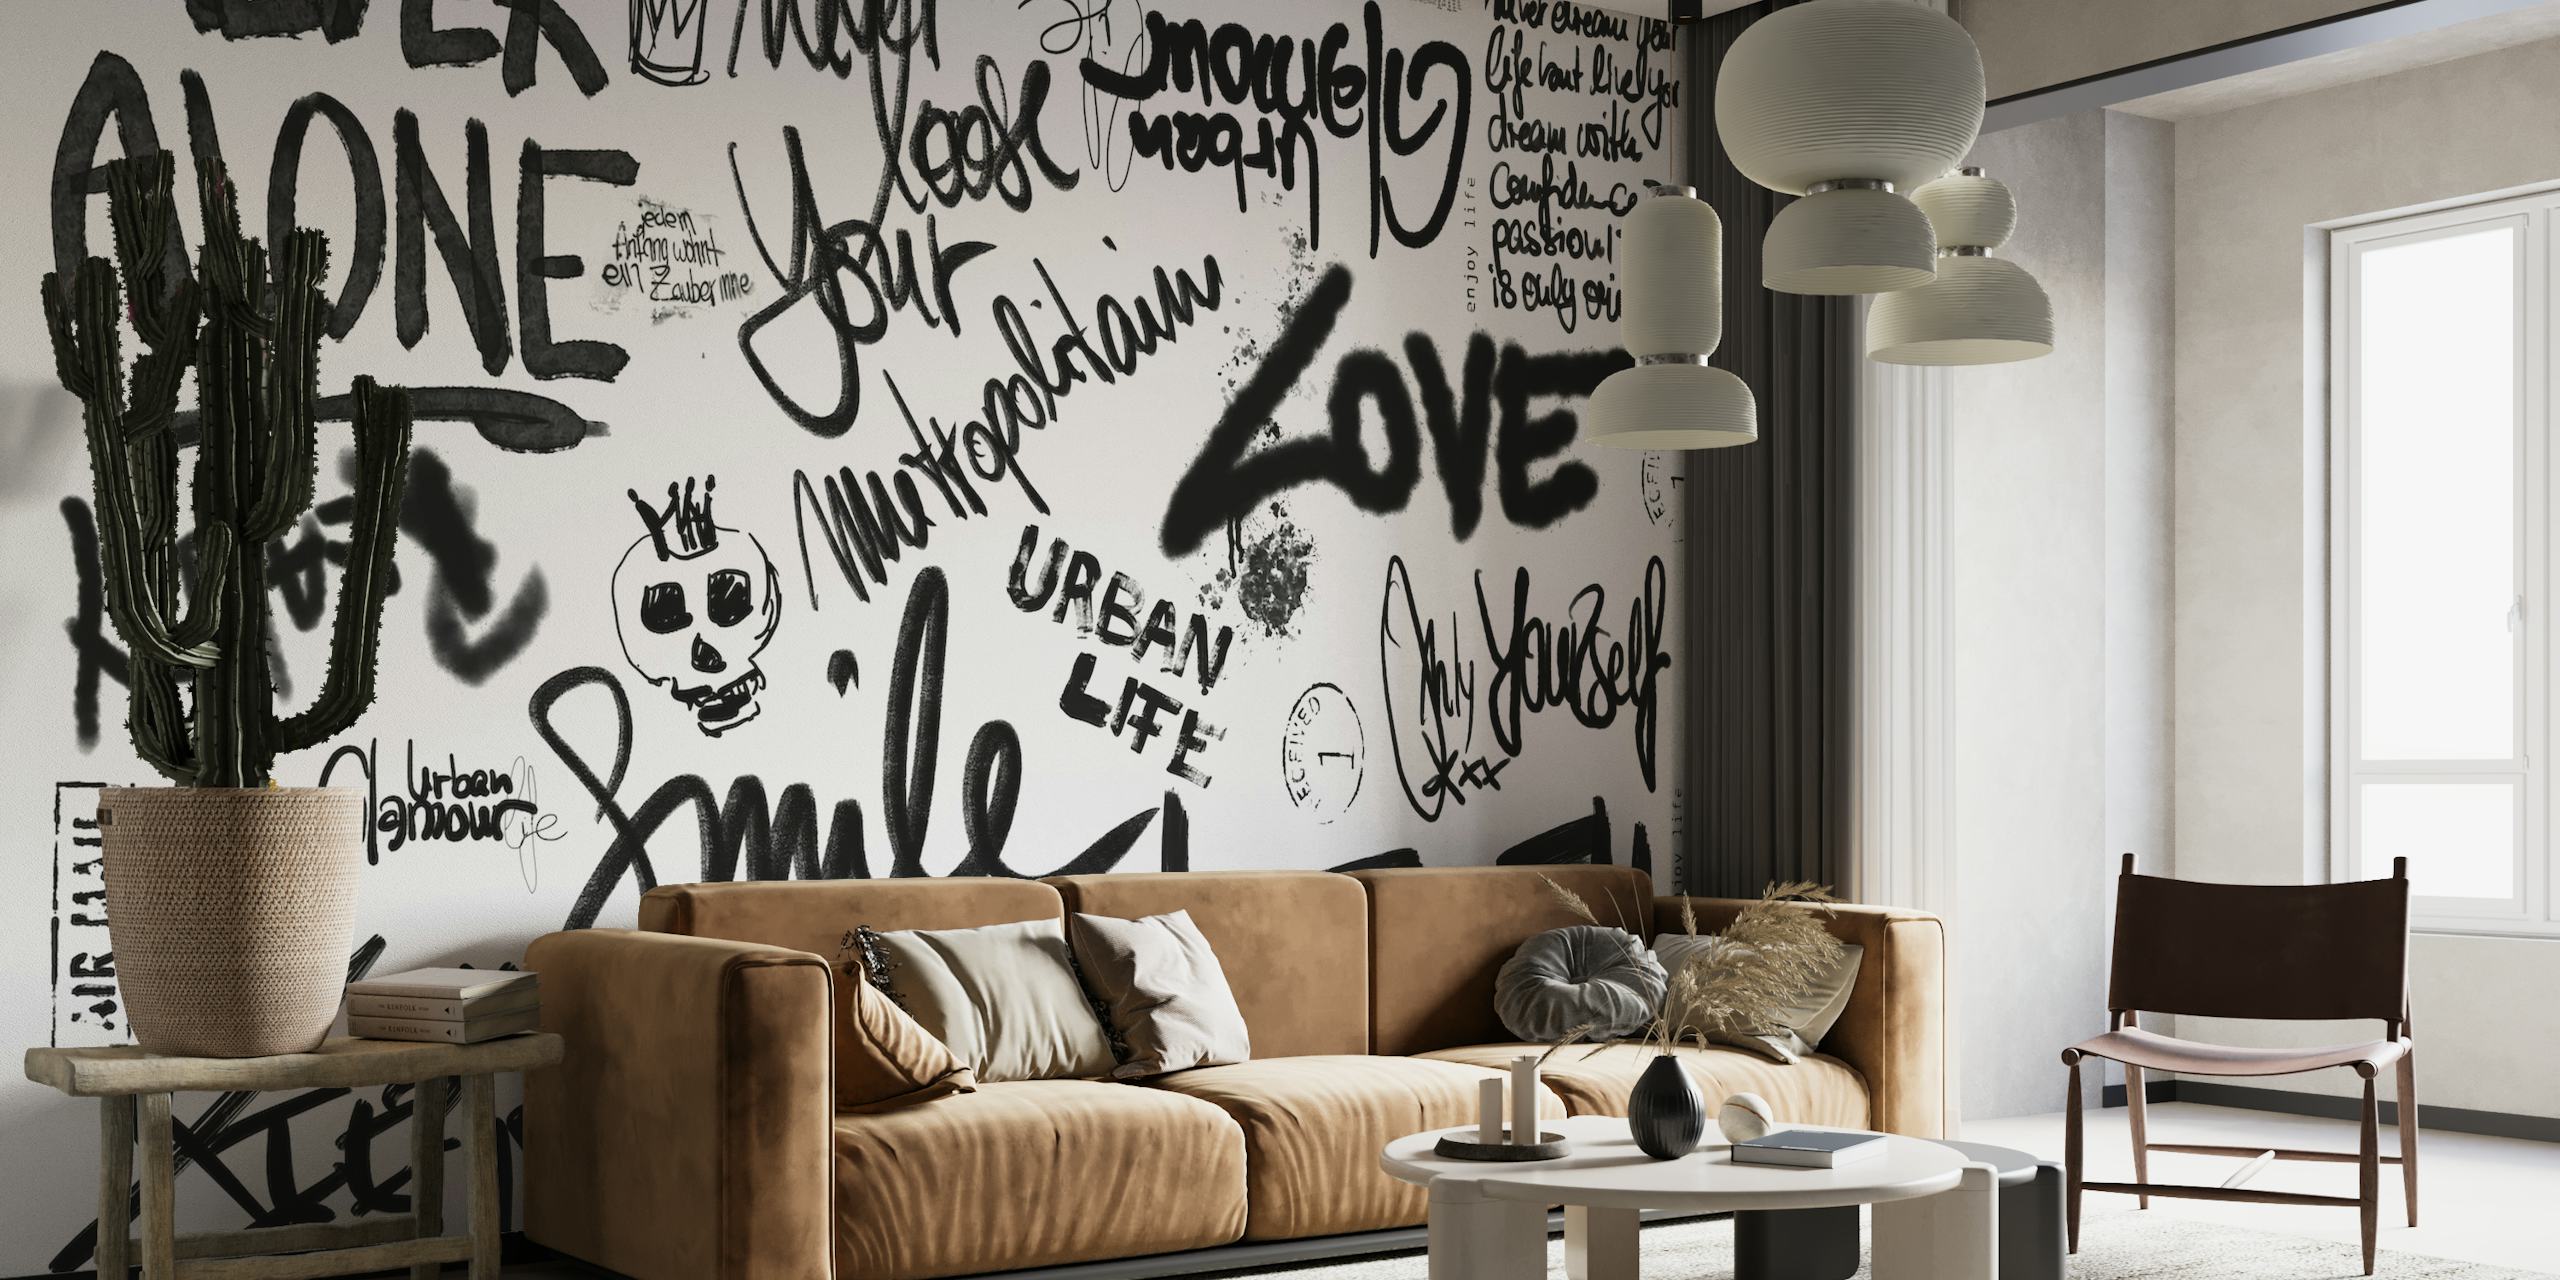 Urban-inspired wall mural with graffiti and handwritten typography